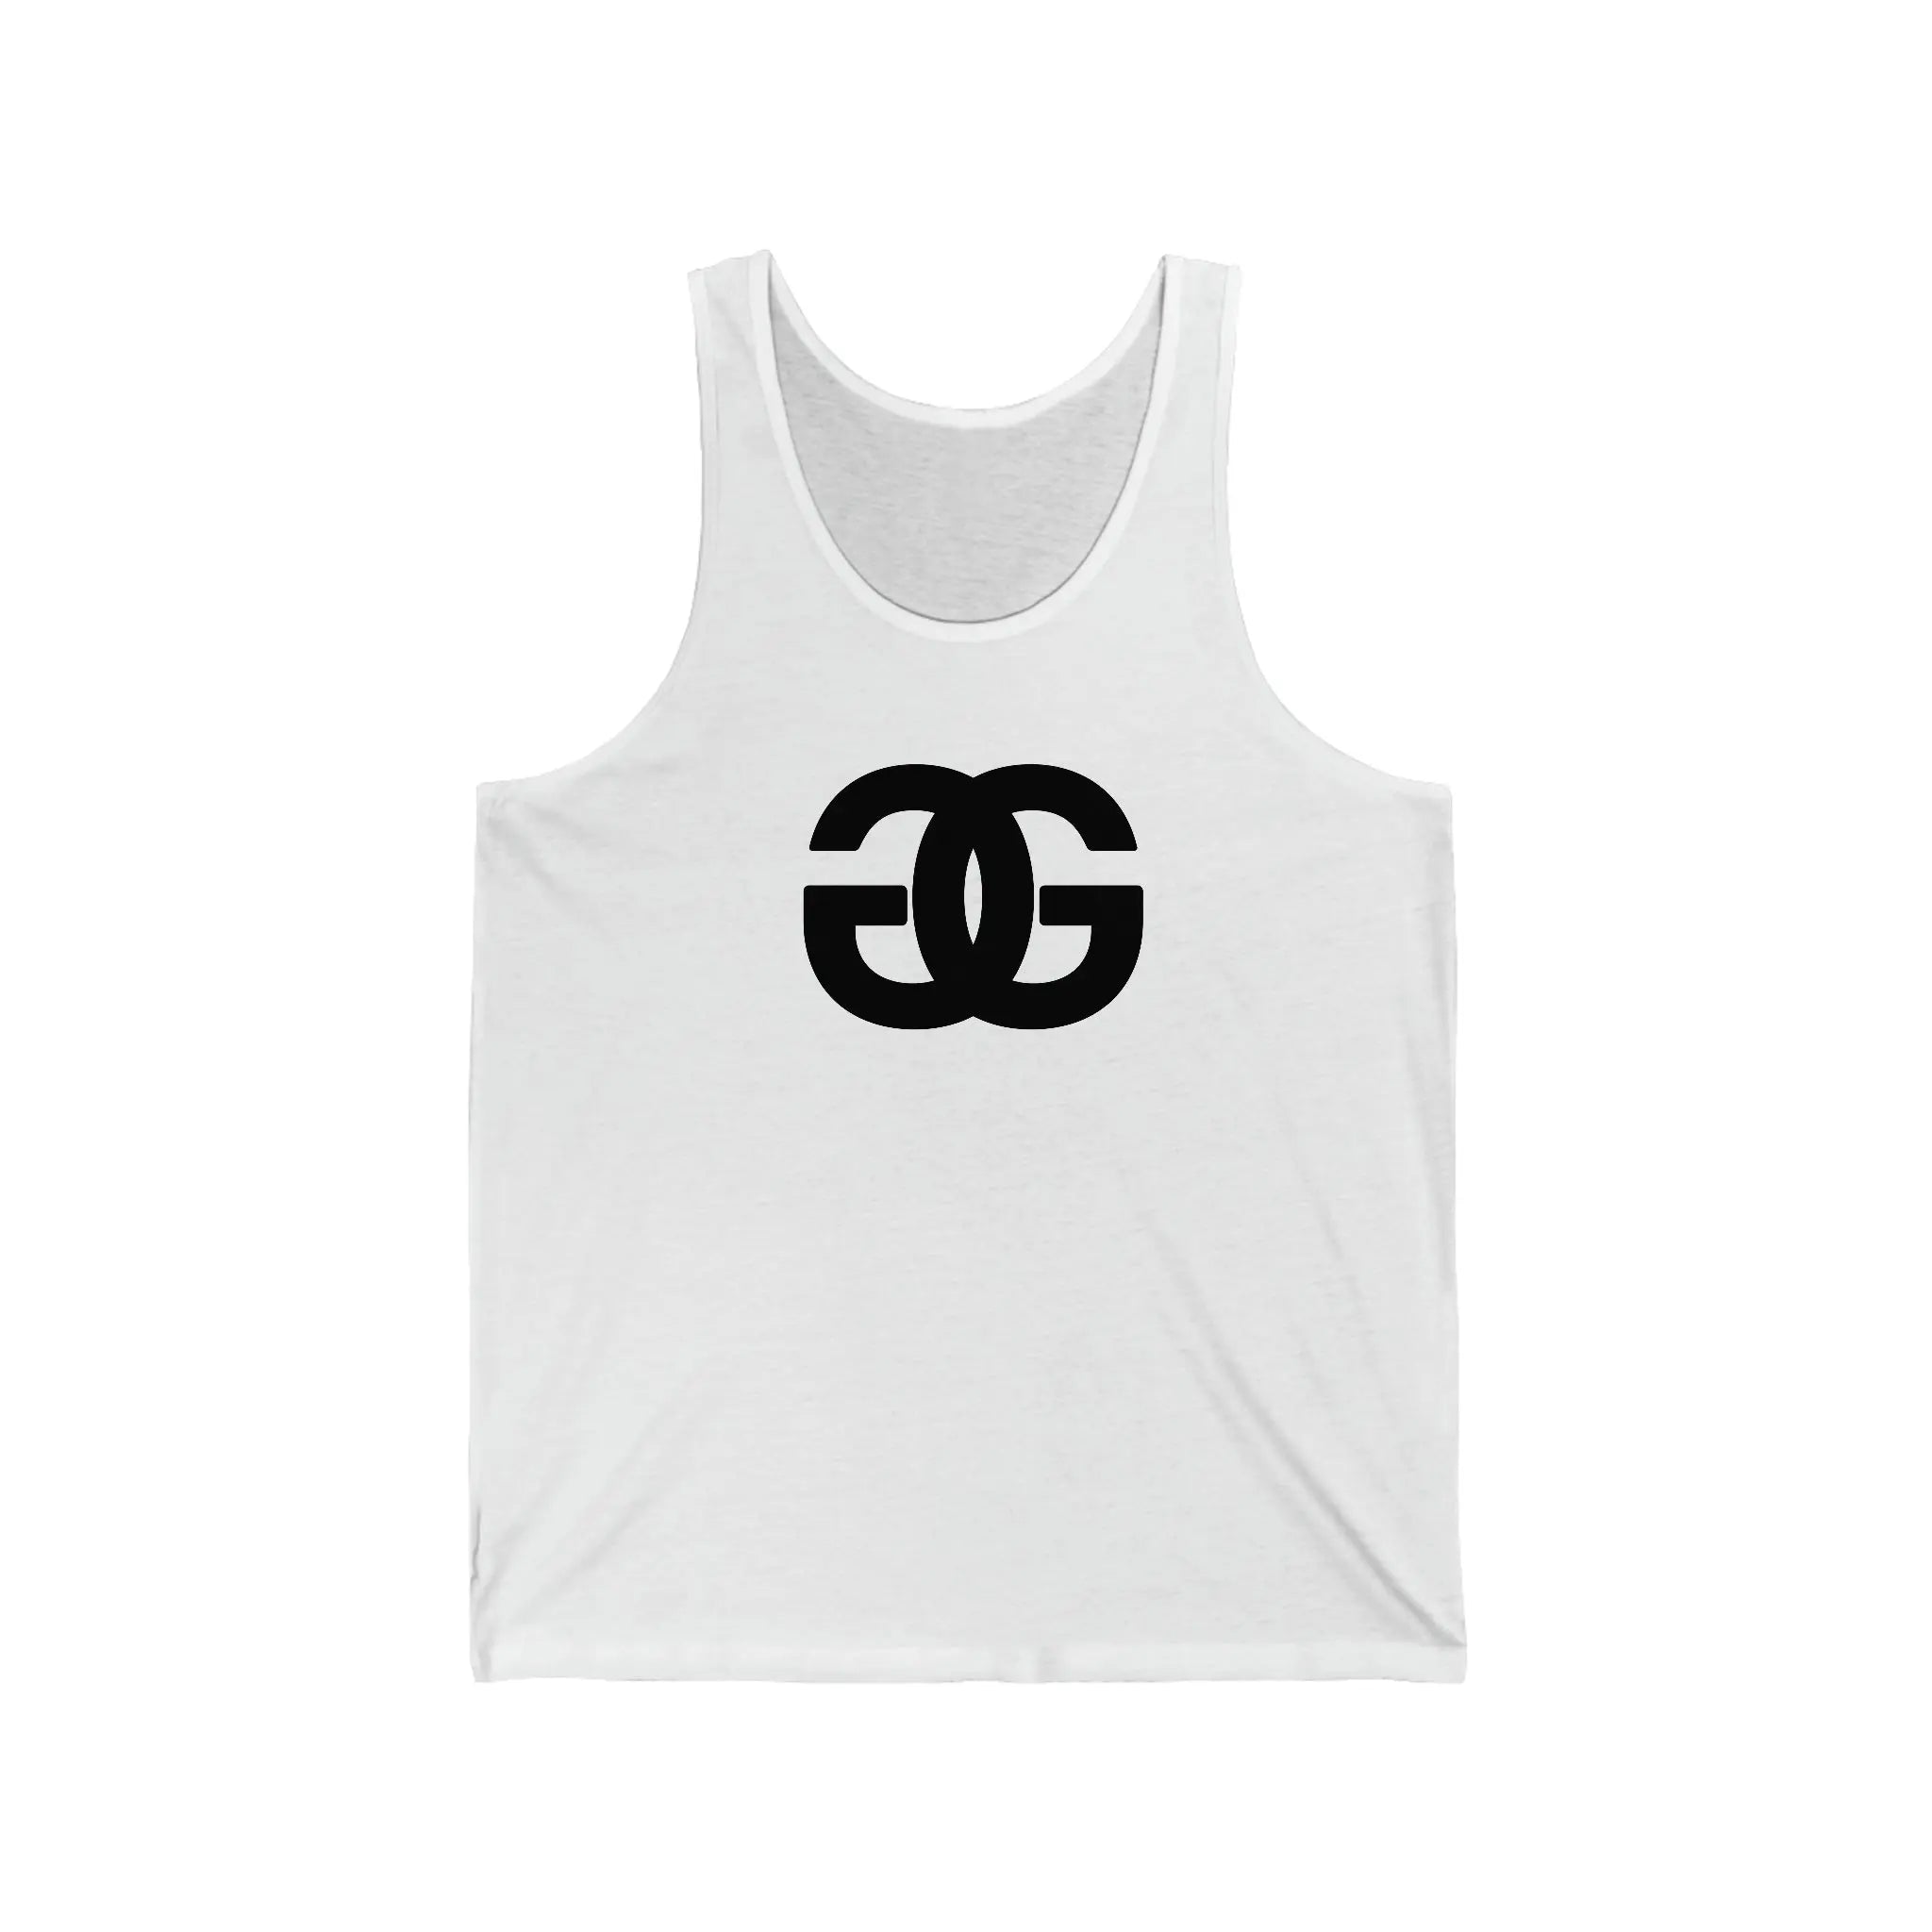  G is for Groove Relaxed Fit Jersey Tank Tank TopMWhite